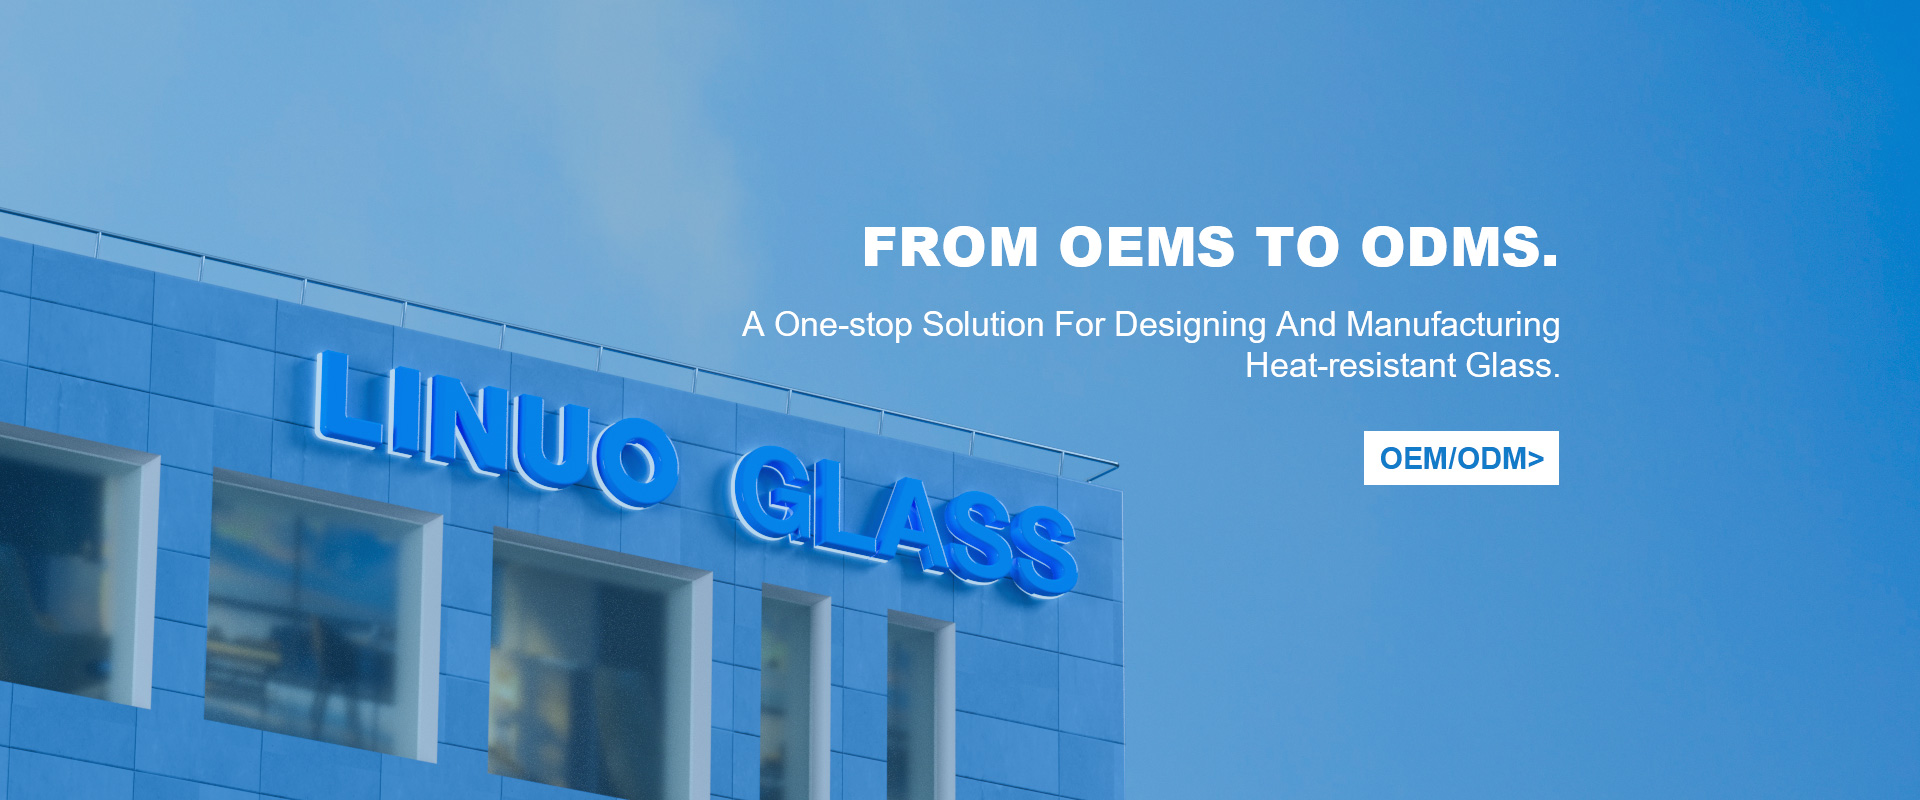 A One-stop Solution For Designing And Manufacturing Heat-resistant Glass.